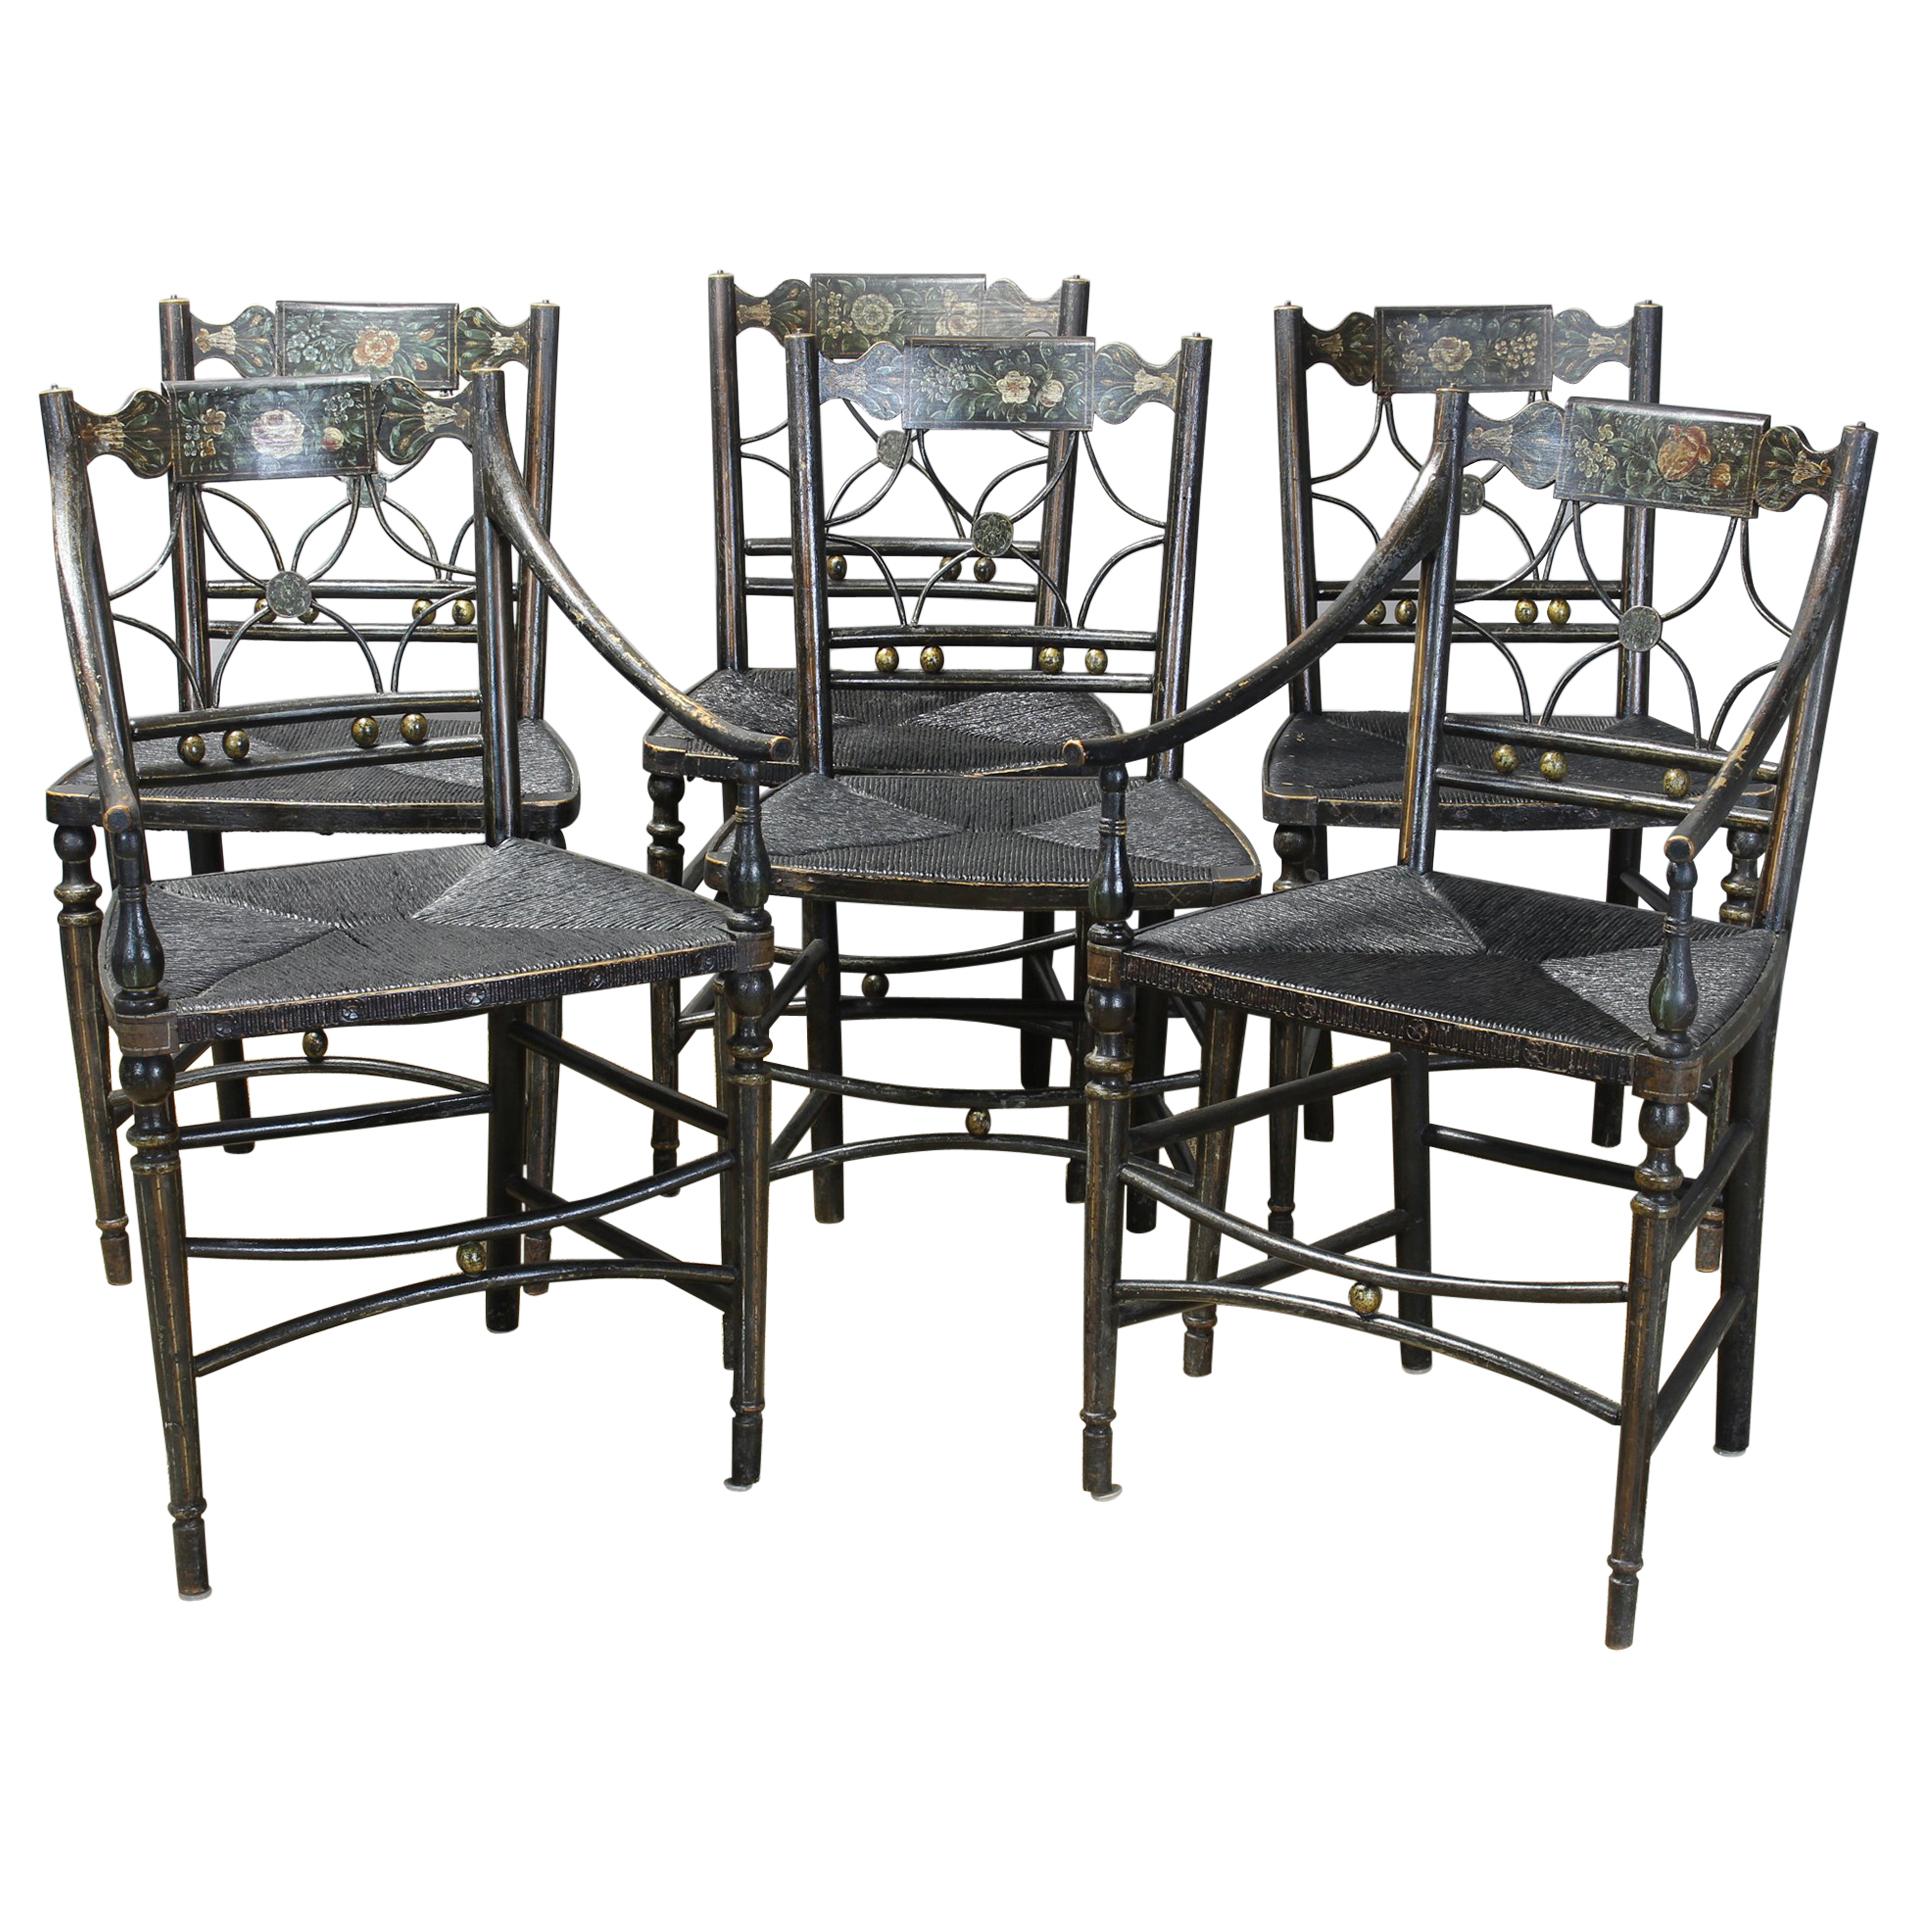 Set of 6 Early 19th Century American "Fancy" Dining Chairs